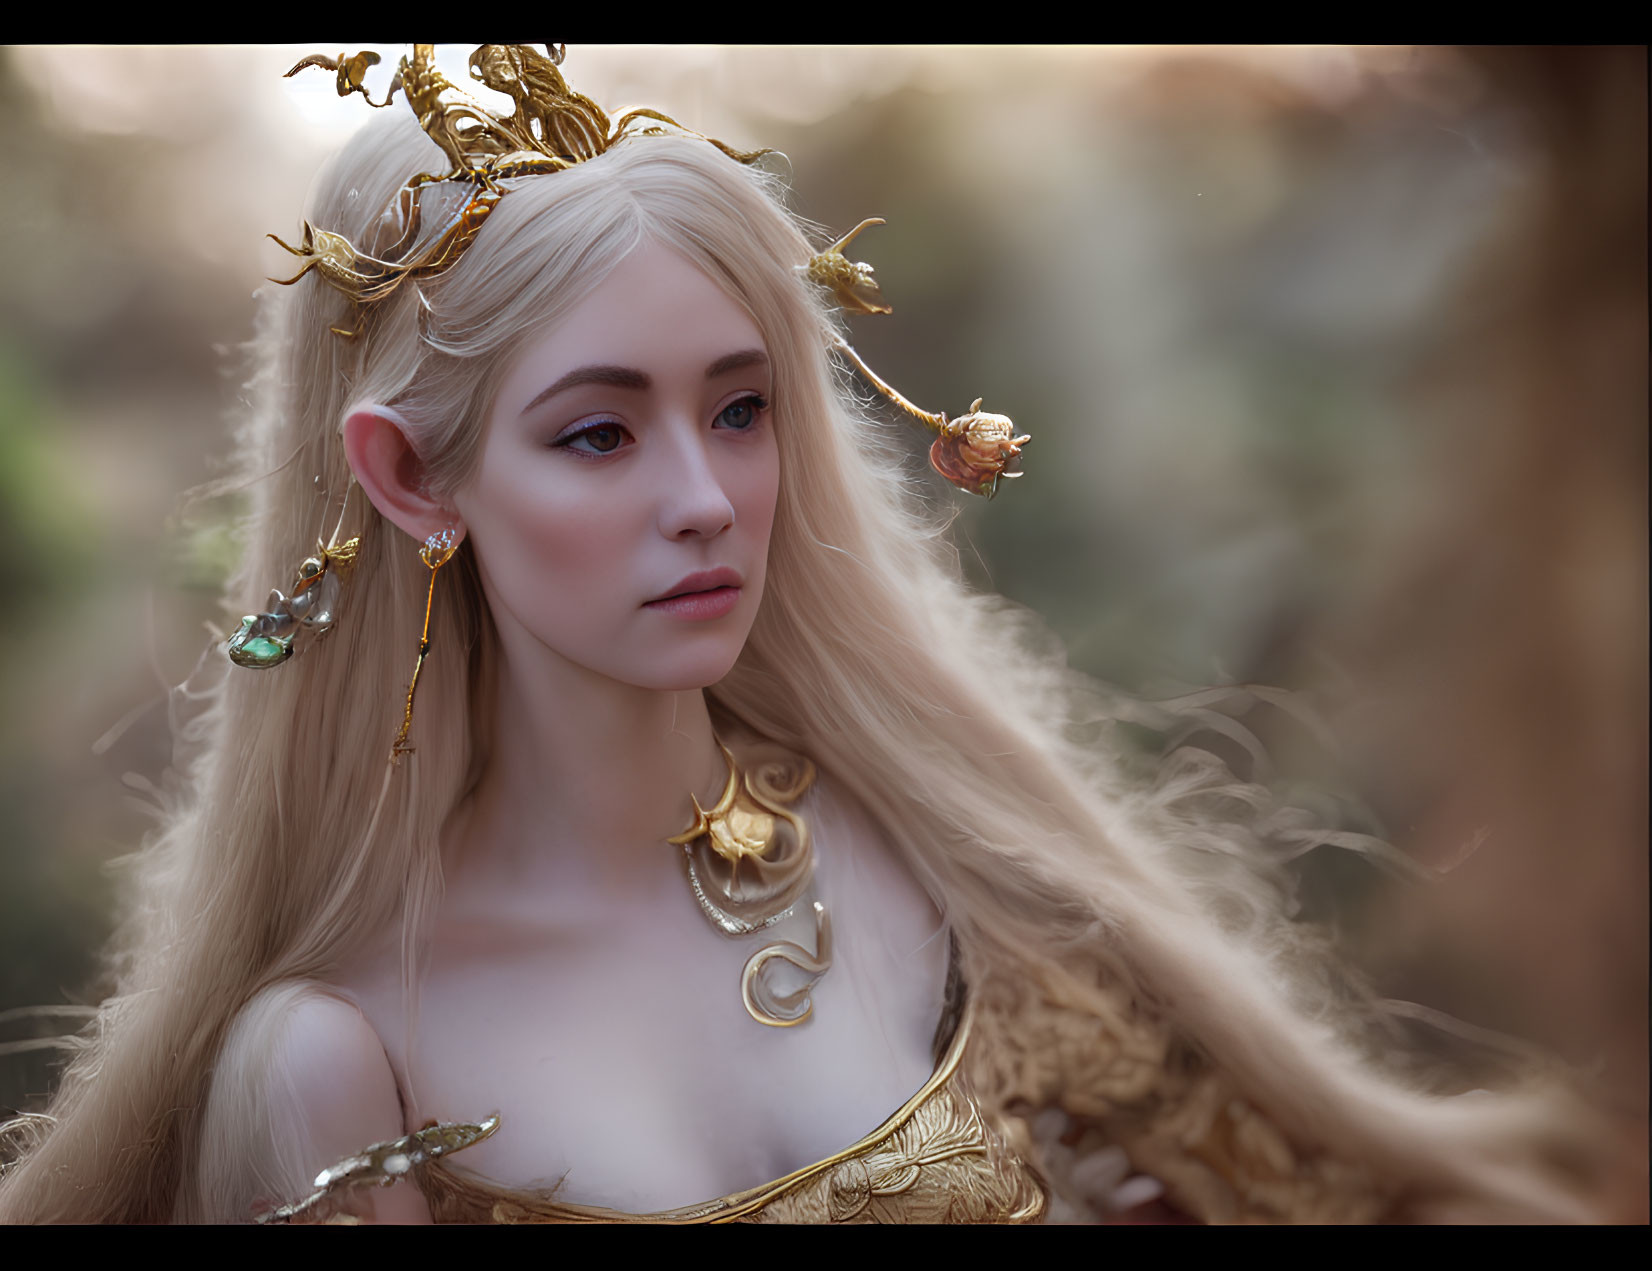 Fantasy character in ornate attire with crown and jewelry, featuring pointed ears, set against blurred natural